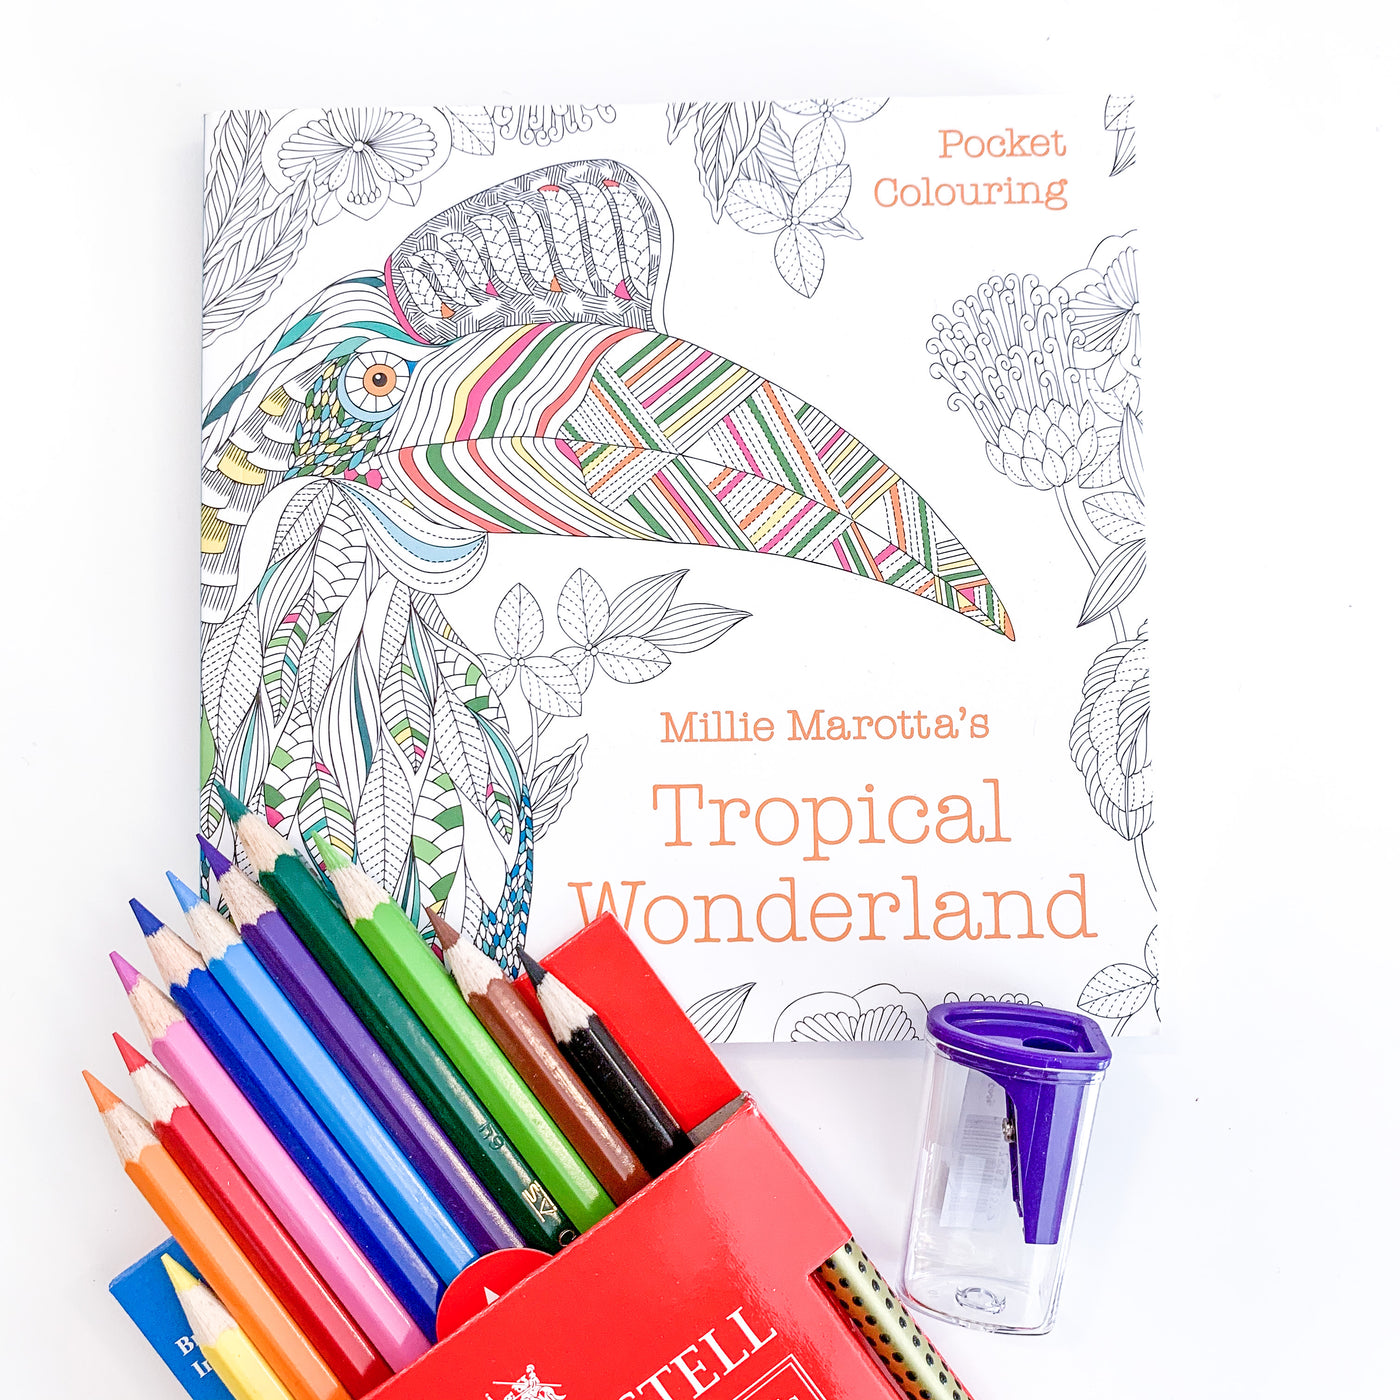 Colouring Pack - Millie Marotta's Tropical Wonderland, with Faber Castell Colouring Pencils and Sharpener - Feel Better Box